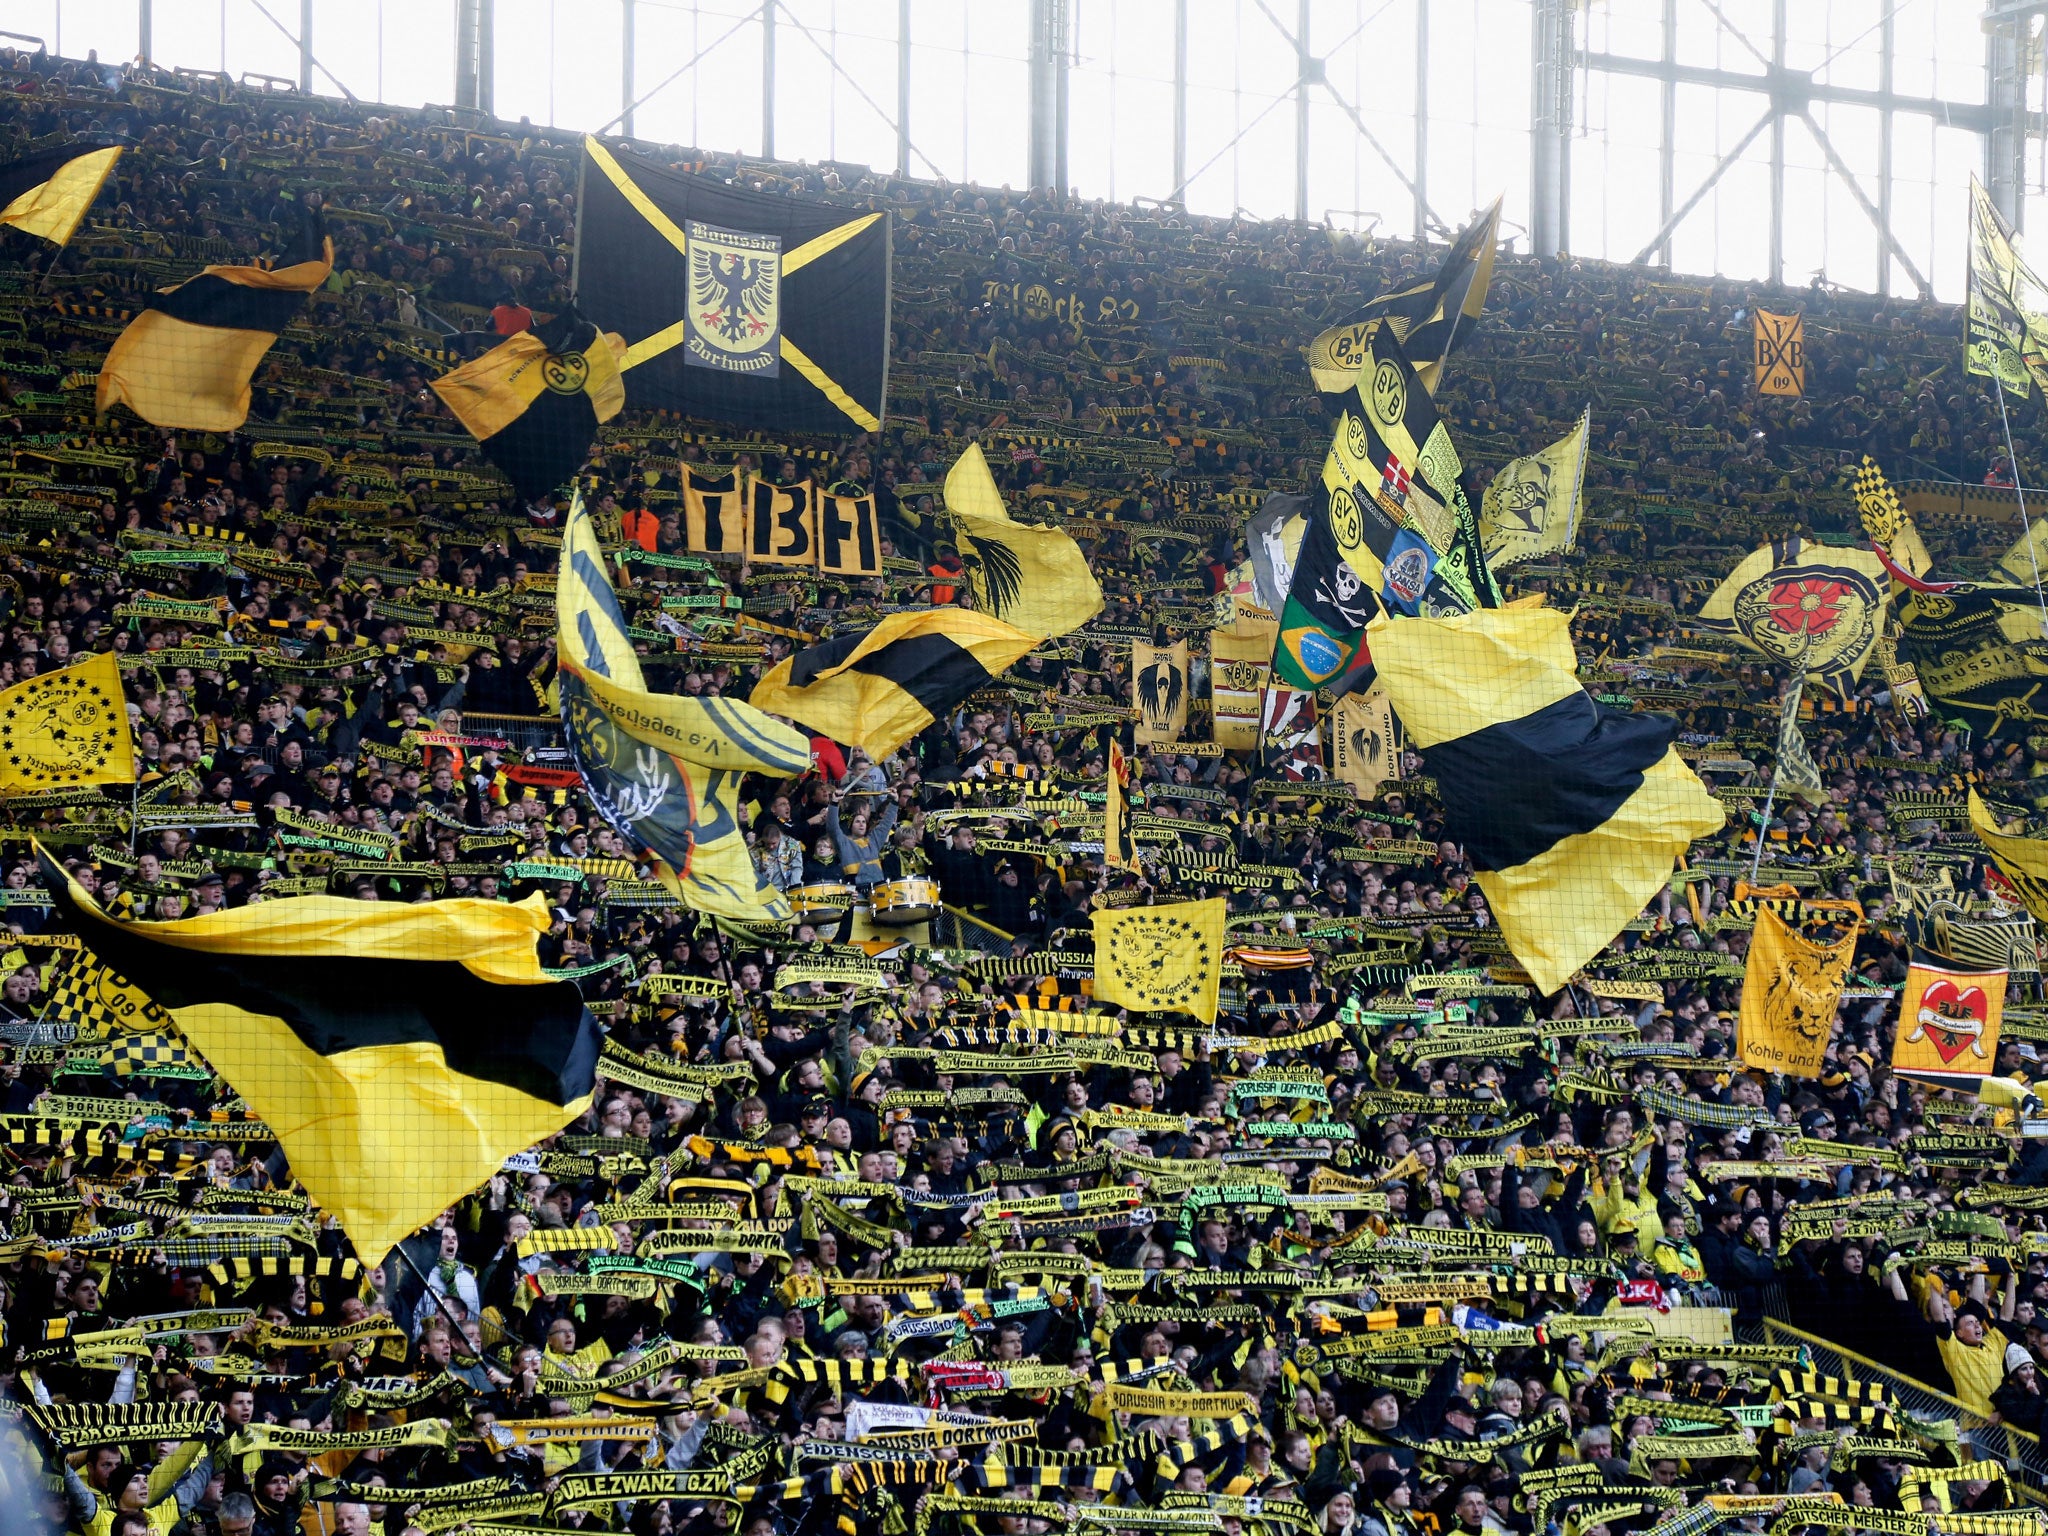 Fans of Borussia Dortmund, like at other German clubs, are allowed to stand